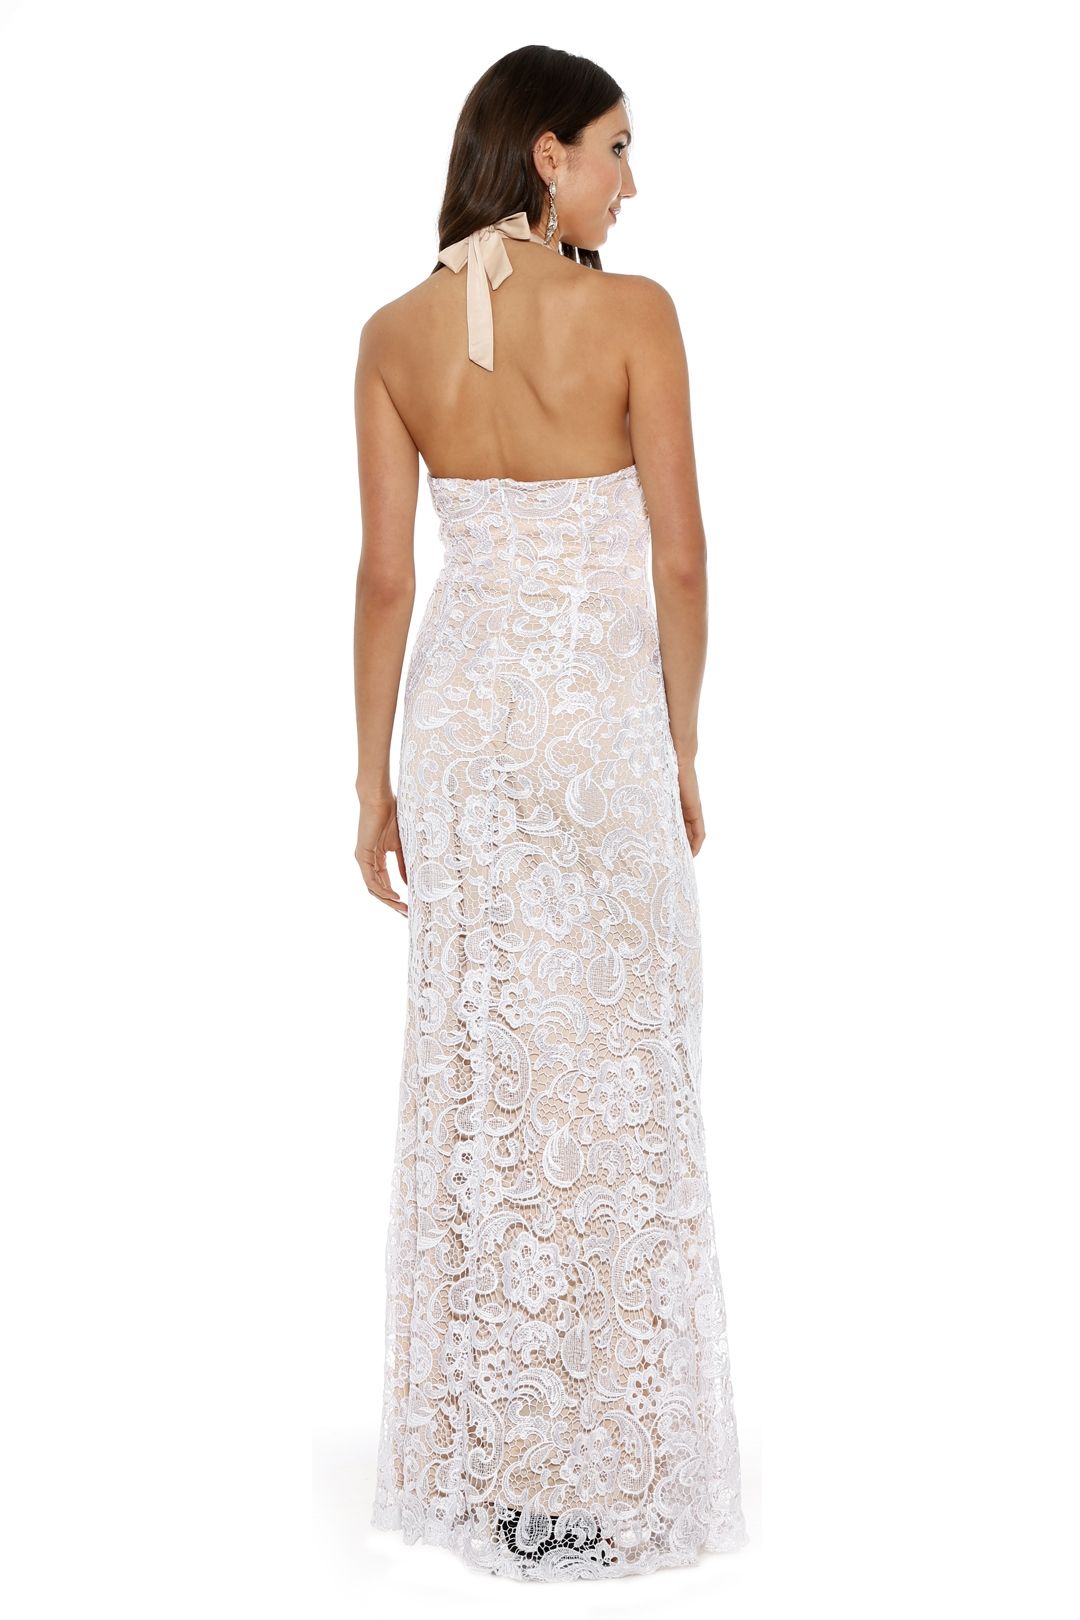 Langhem - Leila White and Nude Evening Gown - White - Back